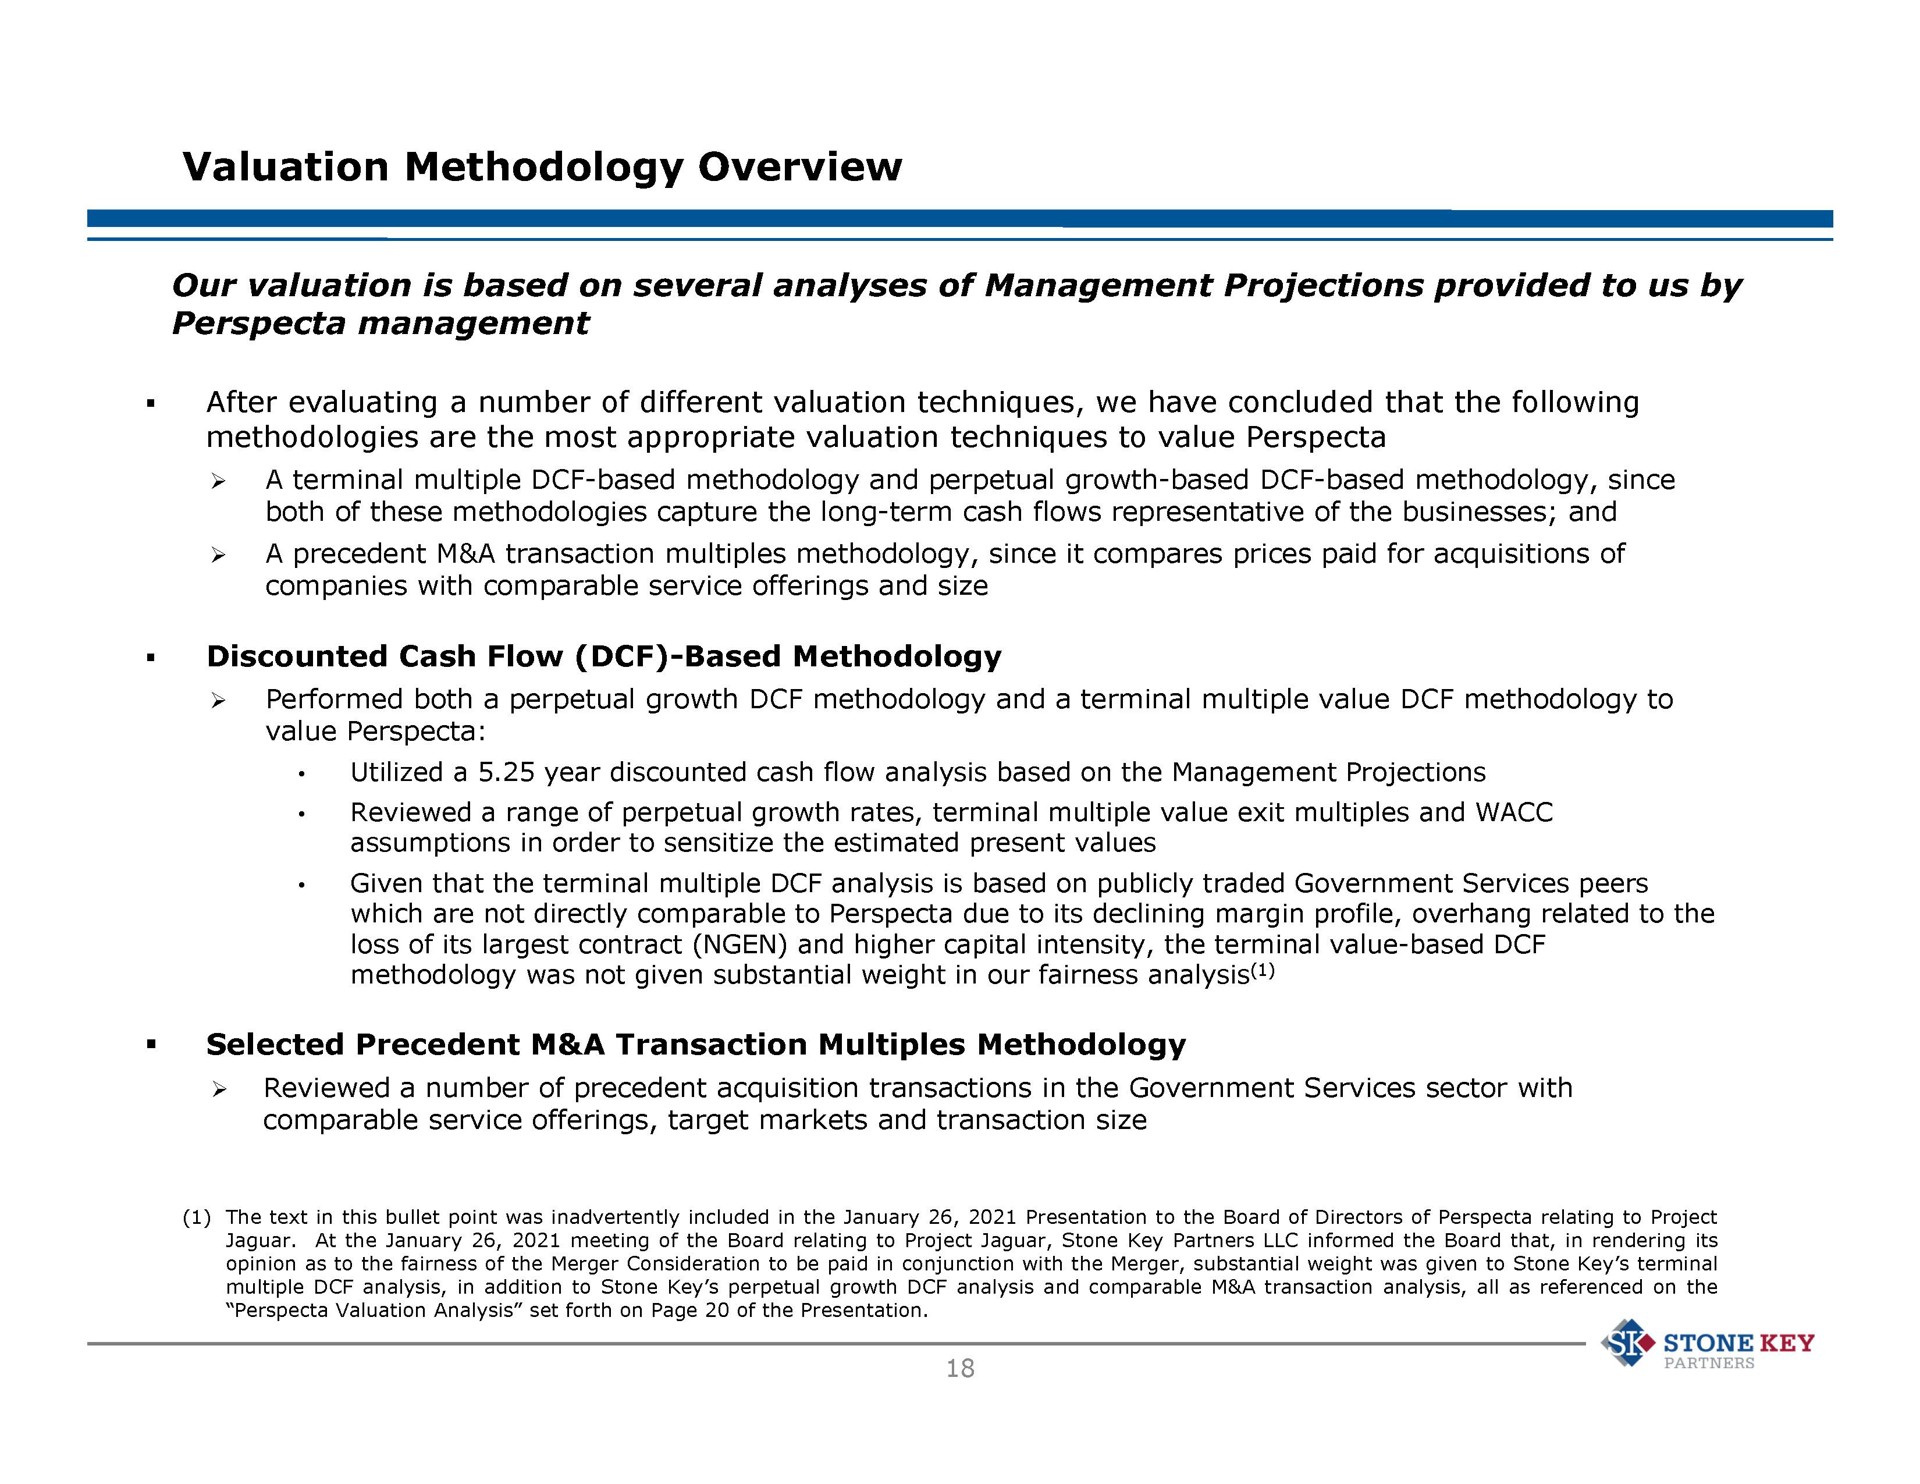 valuation methodology overview our valuation is based on several analyses of management projections provided to us by management stone key | Stone Key Partners